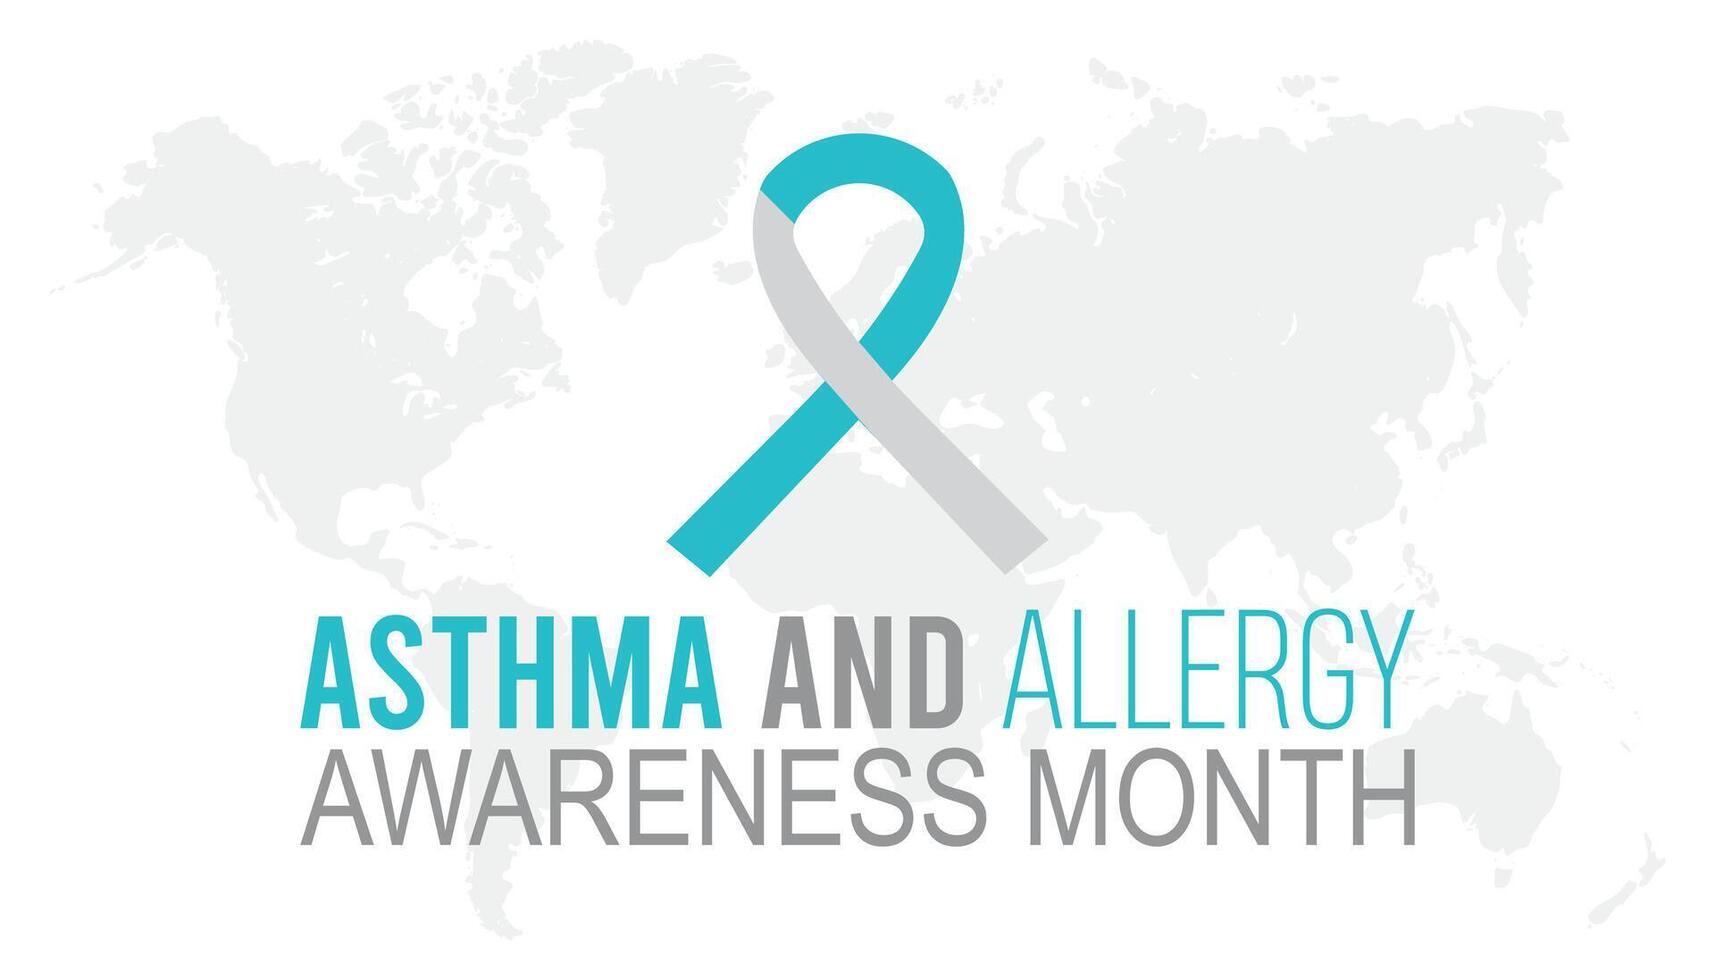 National Asthma and Allergy Awareness Month observed every year in May. Template for background, banner, card, poster with text inscription. vector